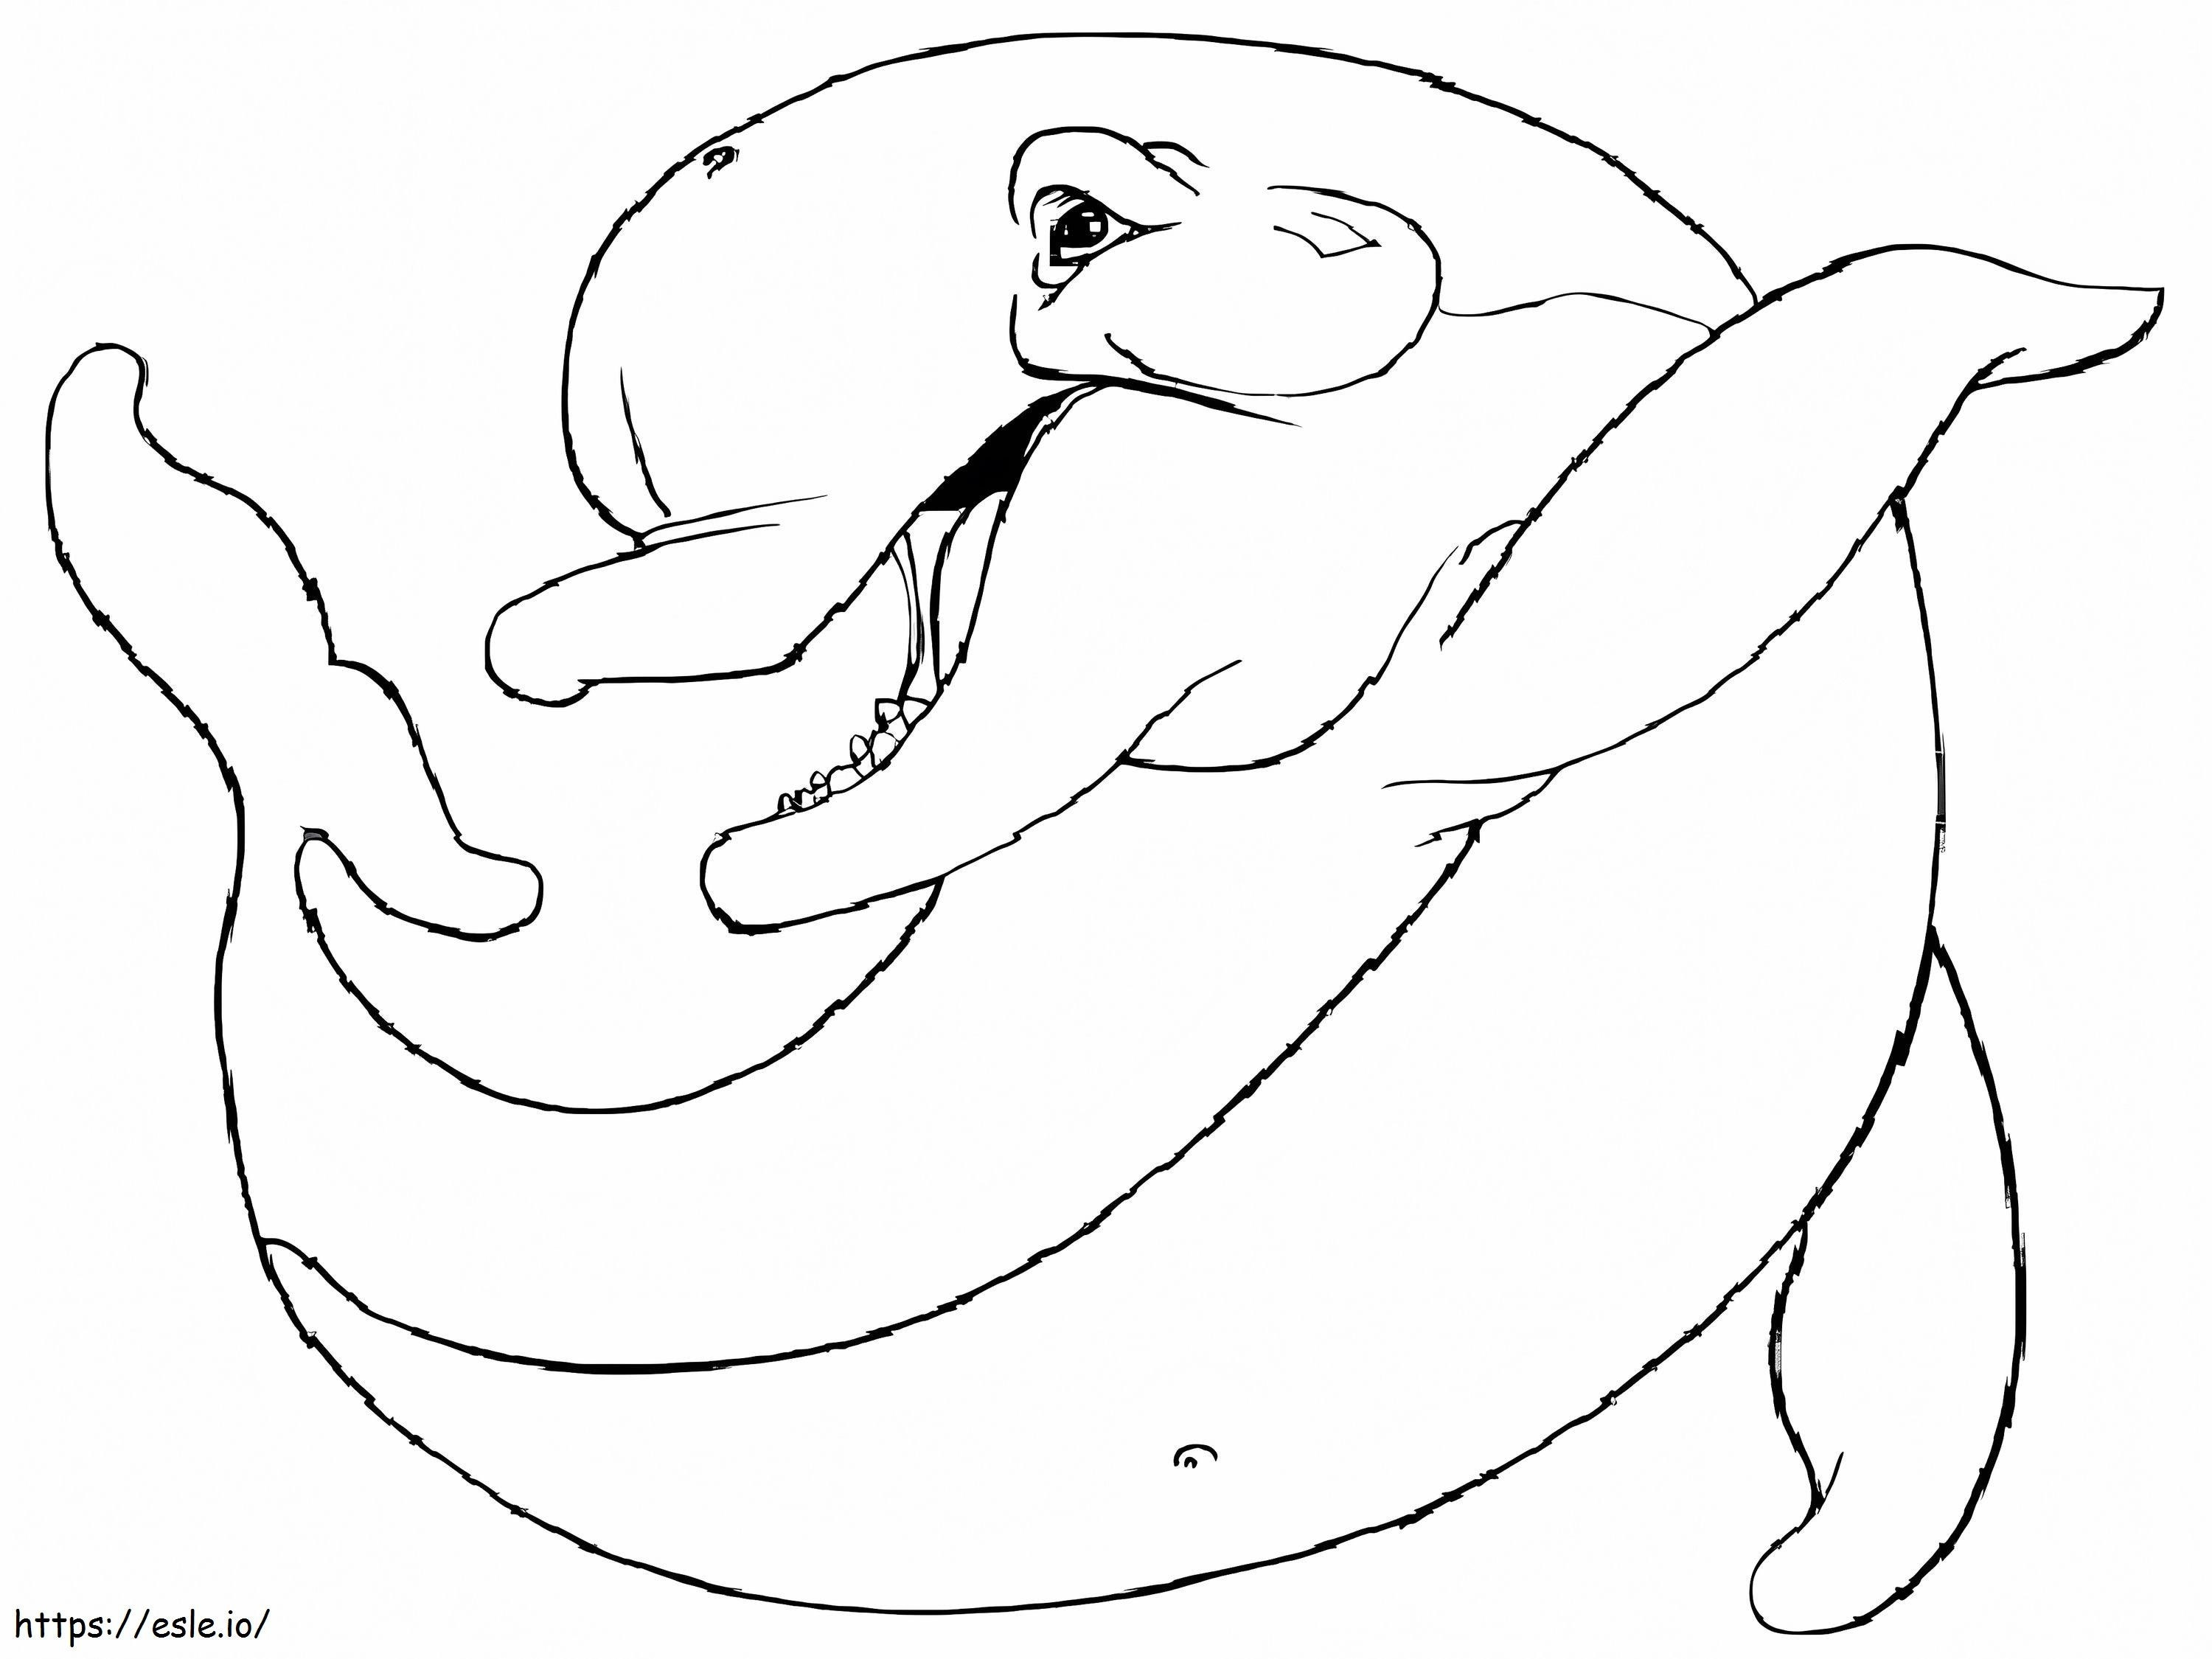 Dolphin Gordo coloring page